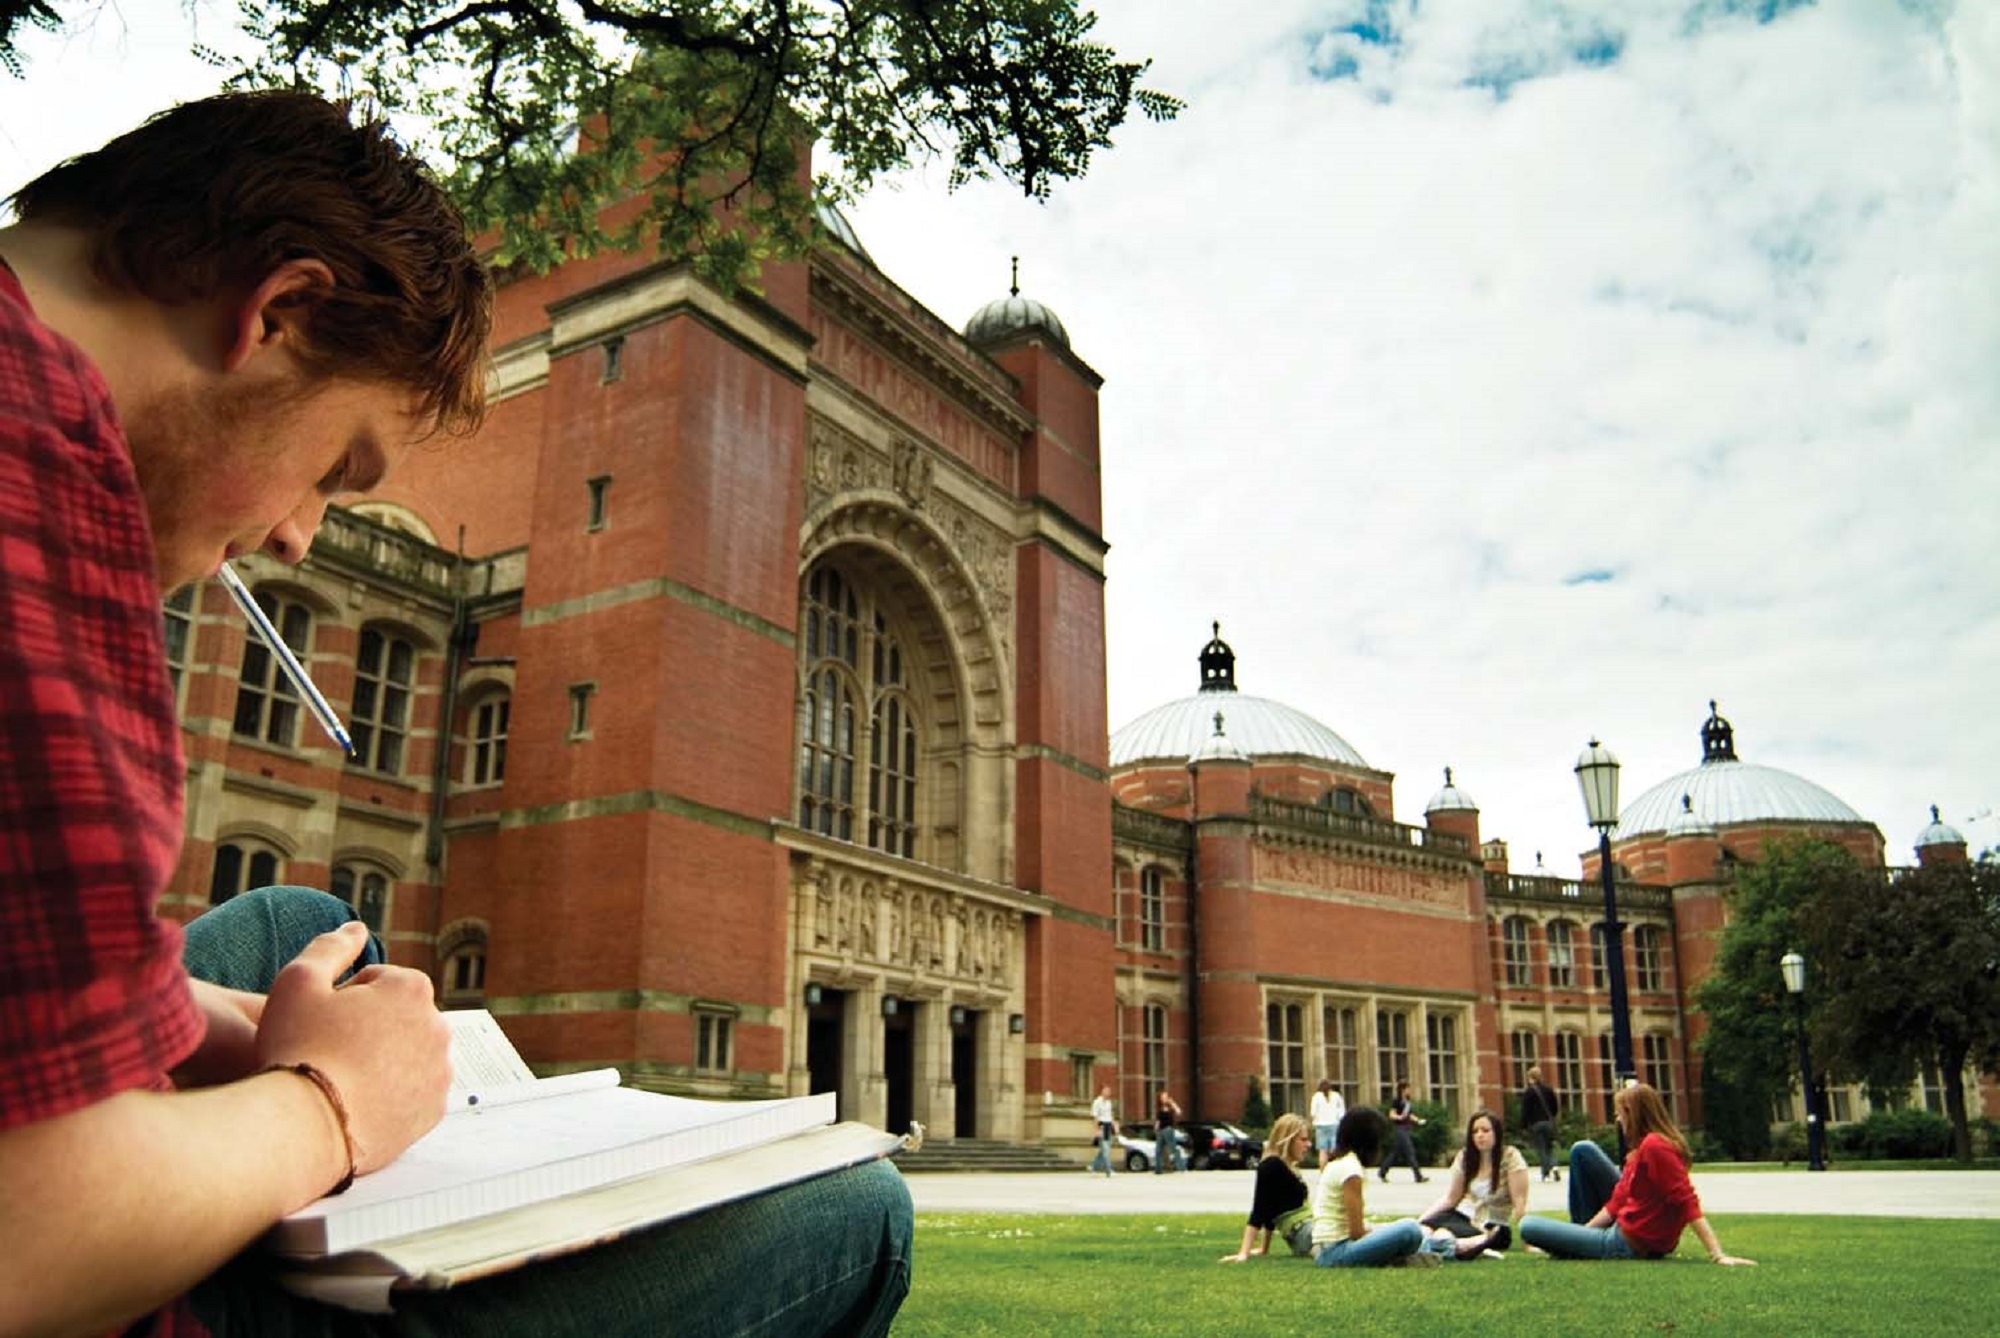 Students working outside Aston Webb building